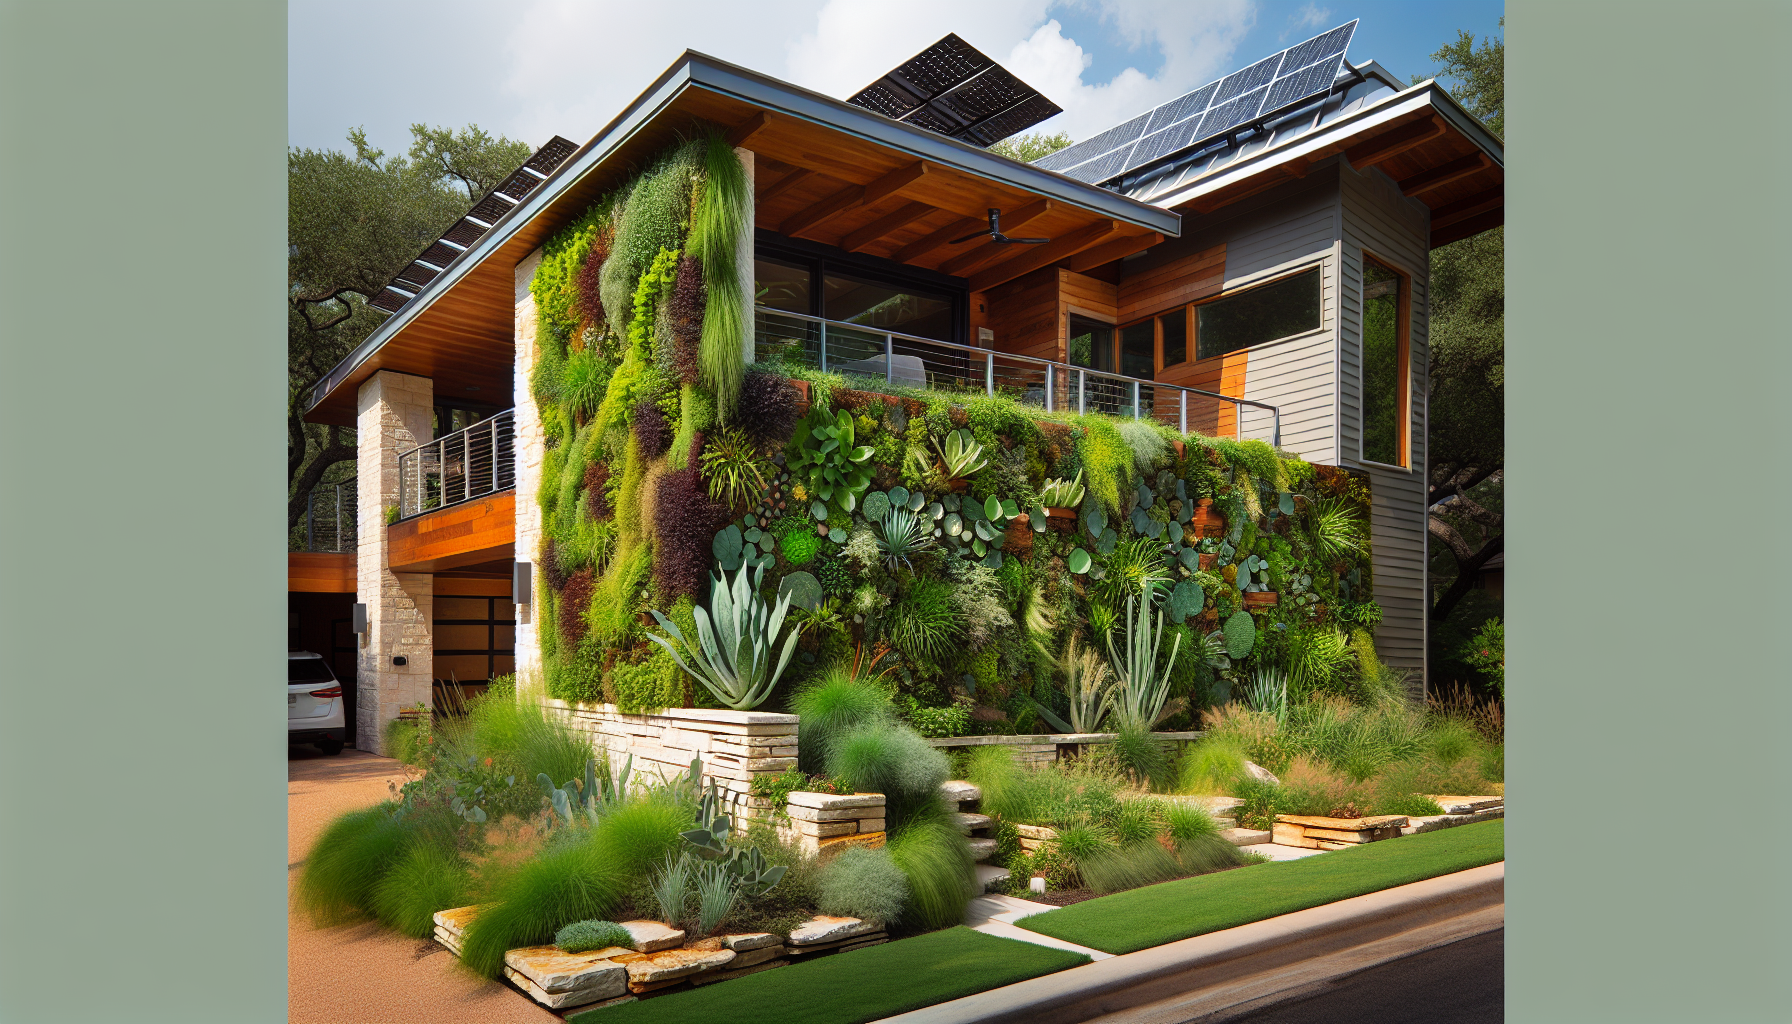 Sustainable living elements in an Austin, TX home